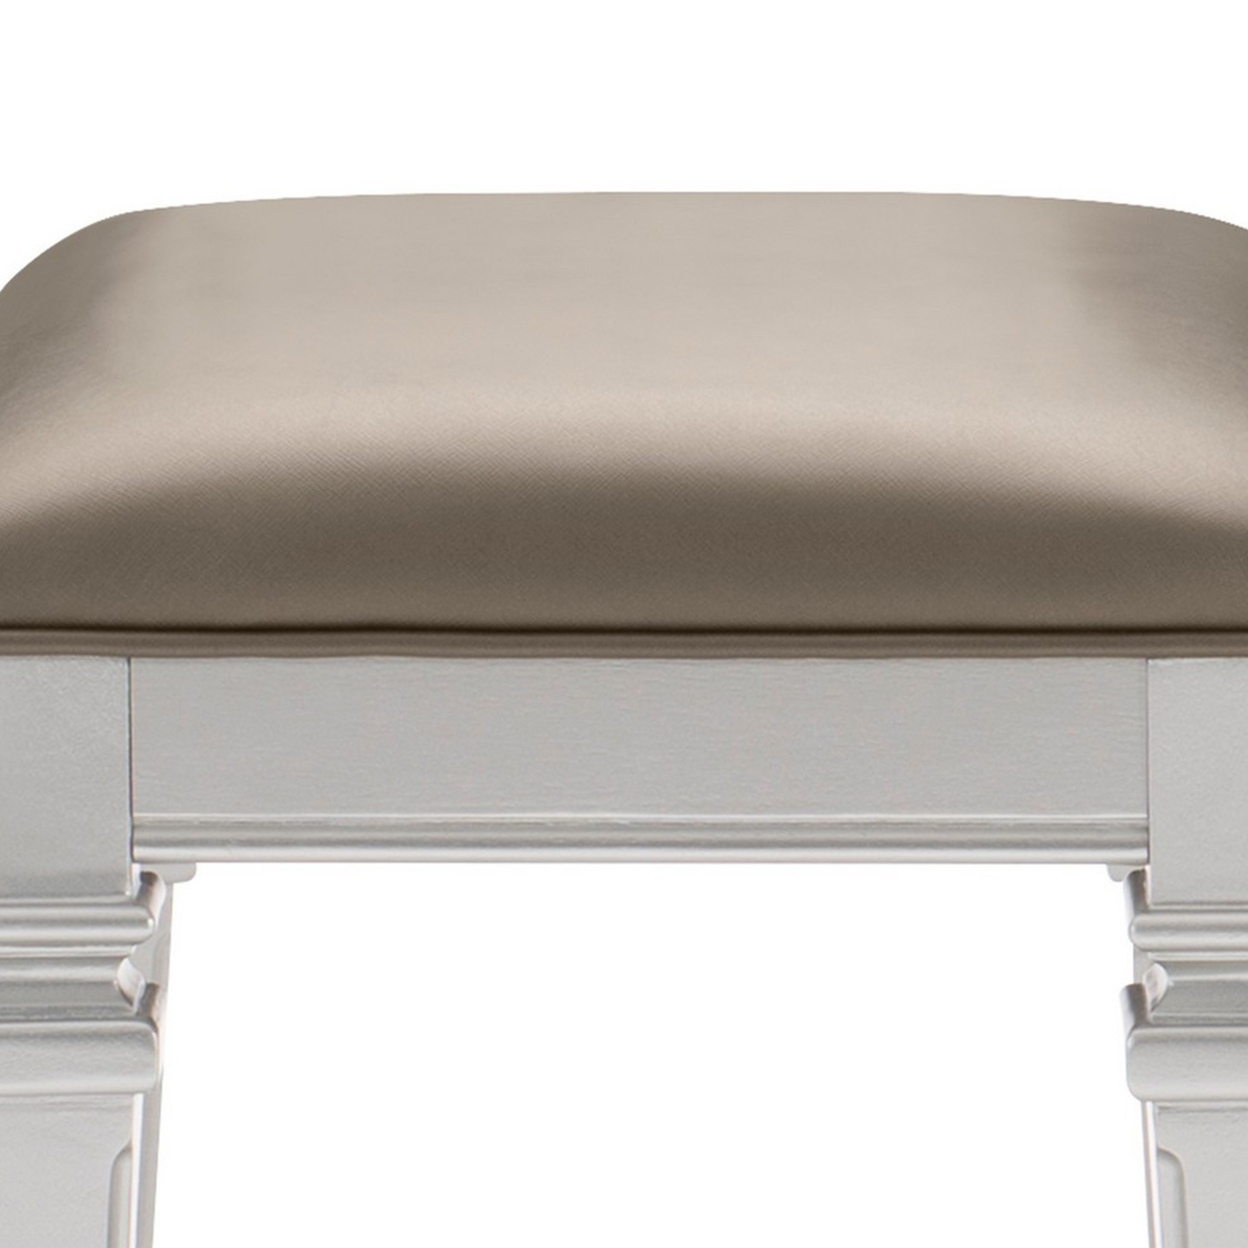 Leatherette Padded Vanity Stool With Tapered Legs And Molded Detail, Silver- Saltoro Sherpi